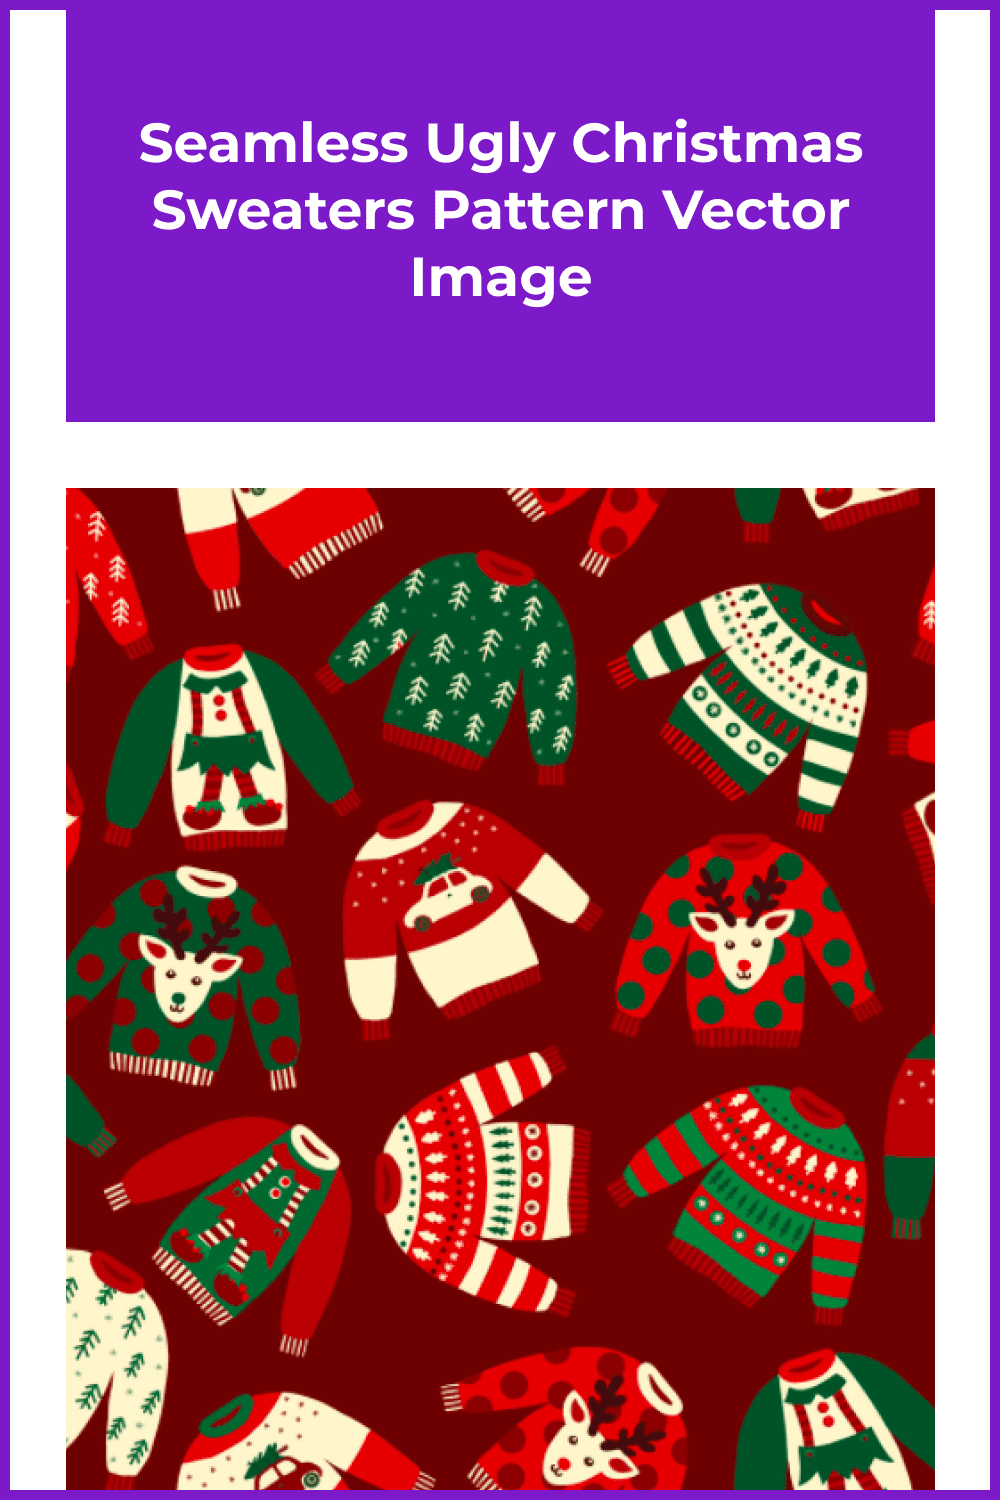 Seamless Ugly Christmas Sweaters Pattern Vector Image.